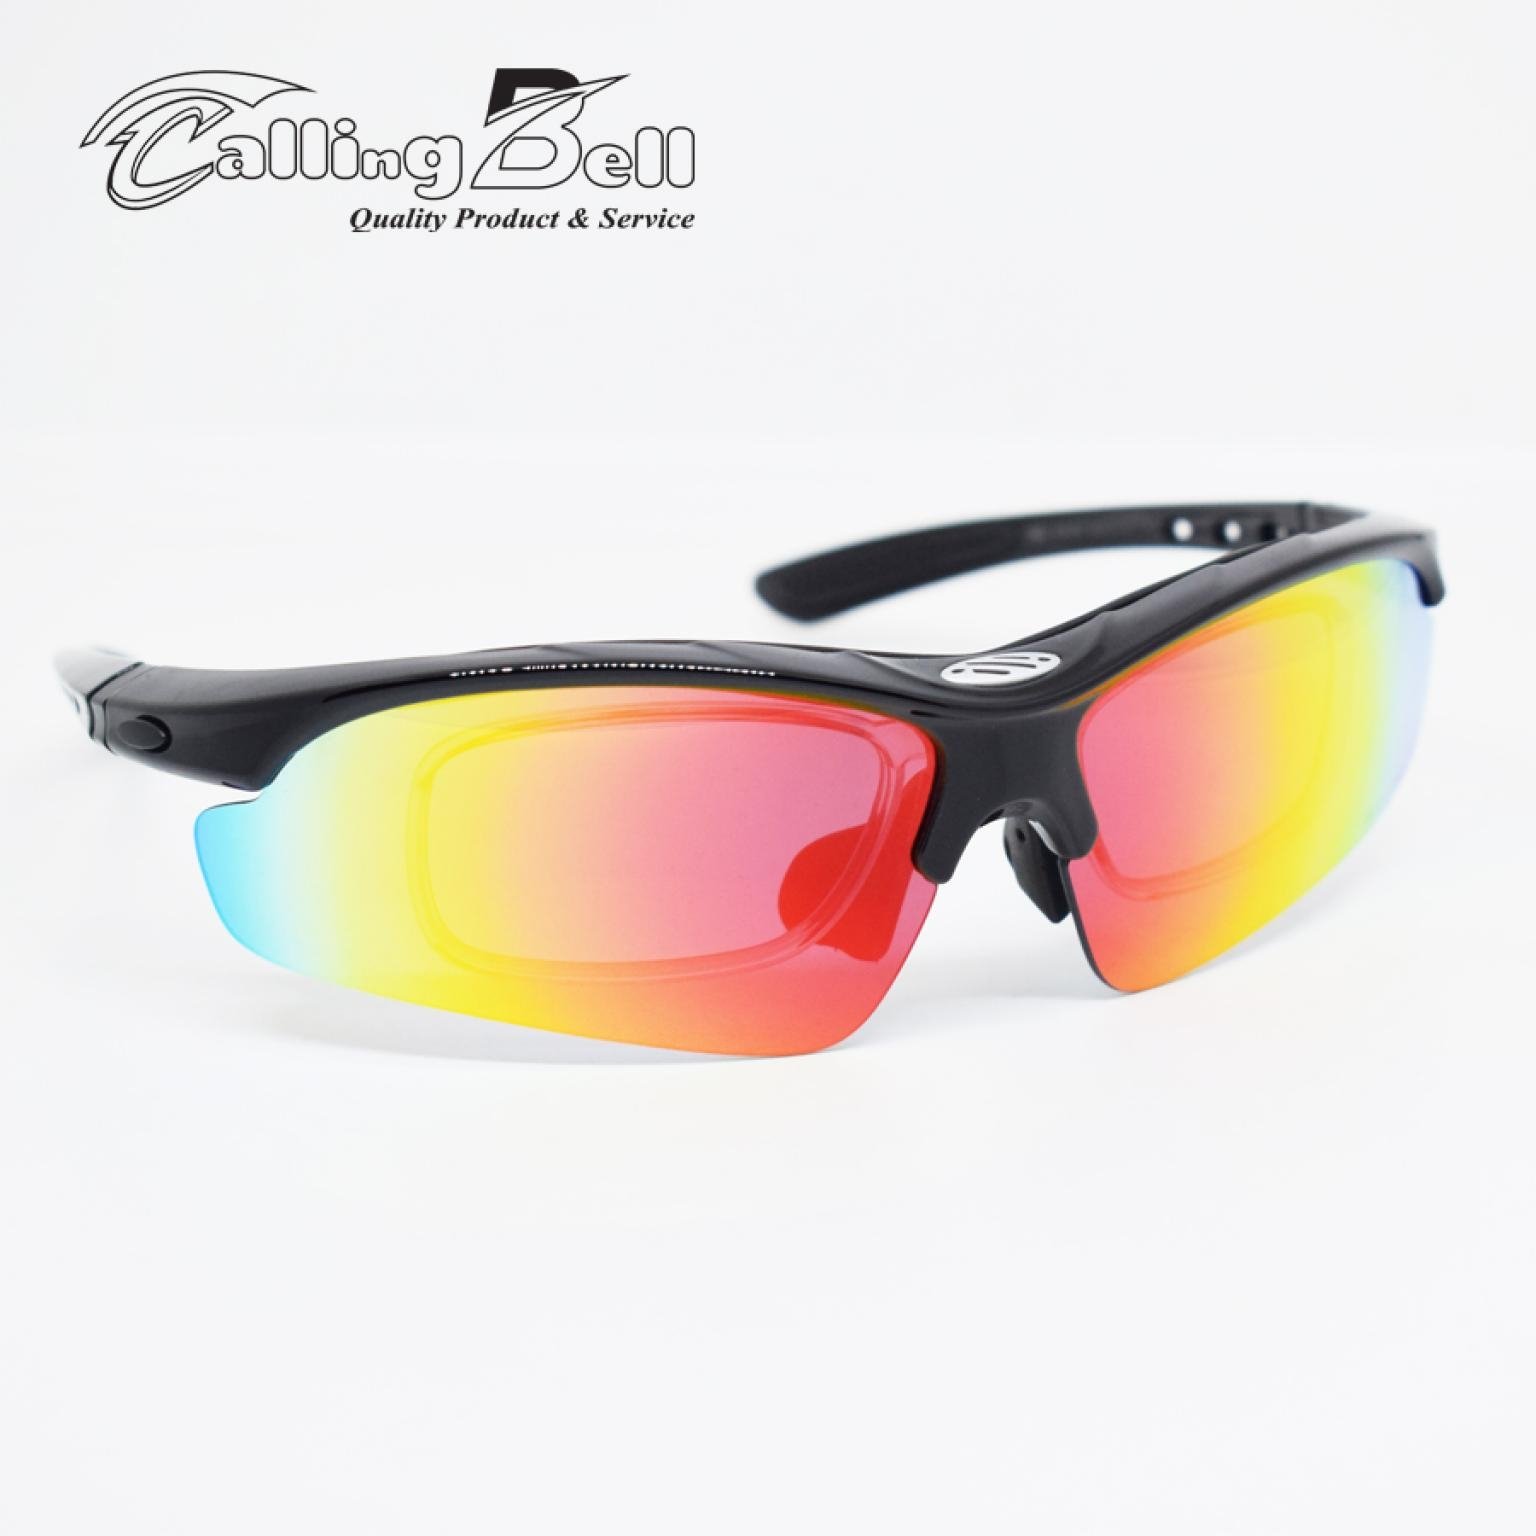 Five in One Sunglass Sports Eye wear For Swimming Driving Cricket Match 5 color Changeable lens 5 in 1 Sunglass With also Night Vision 